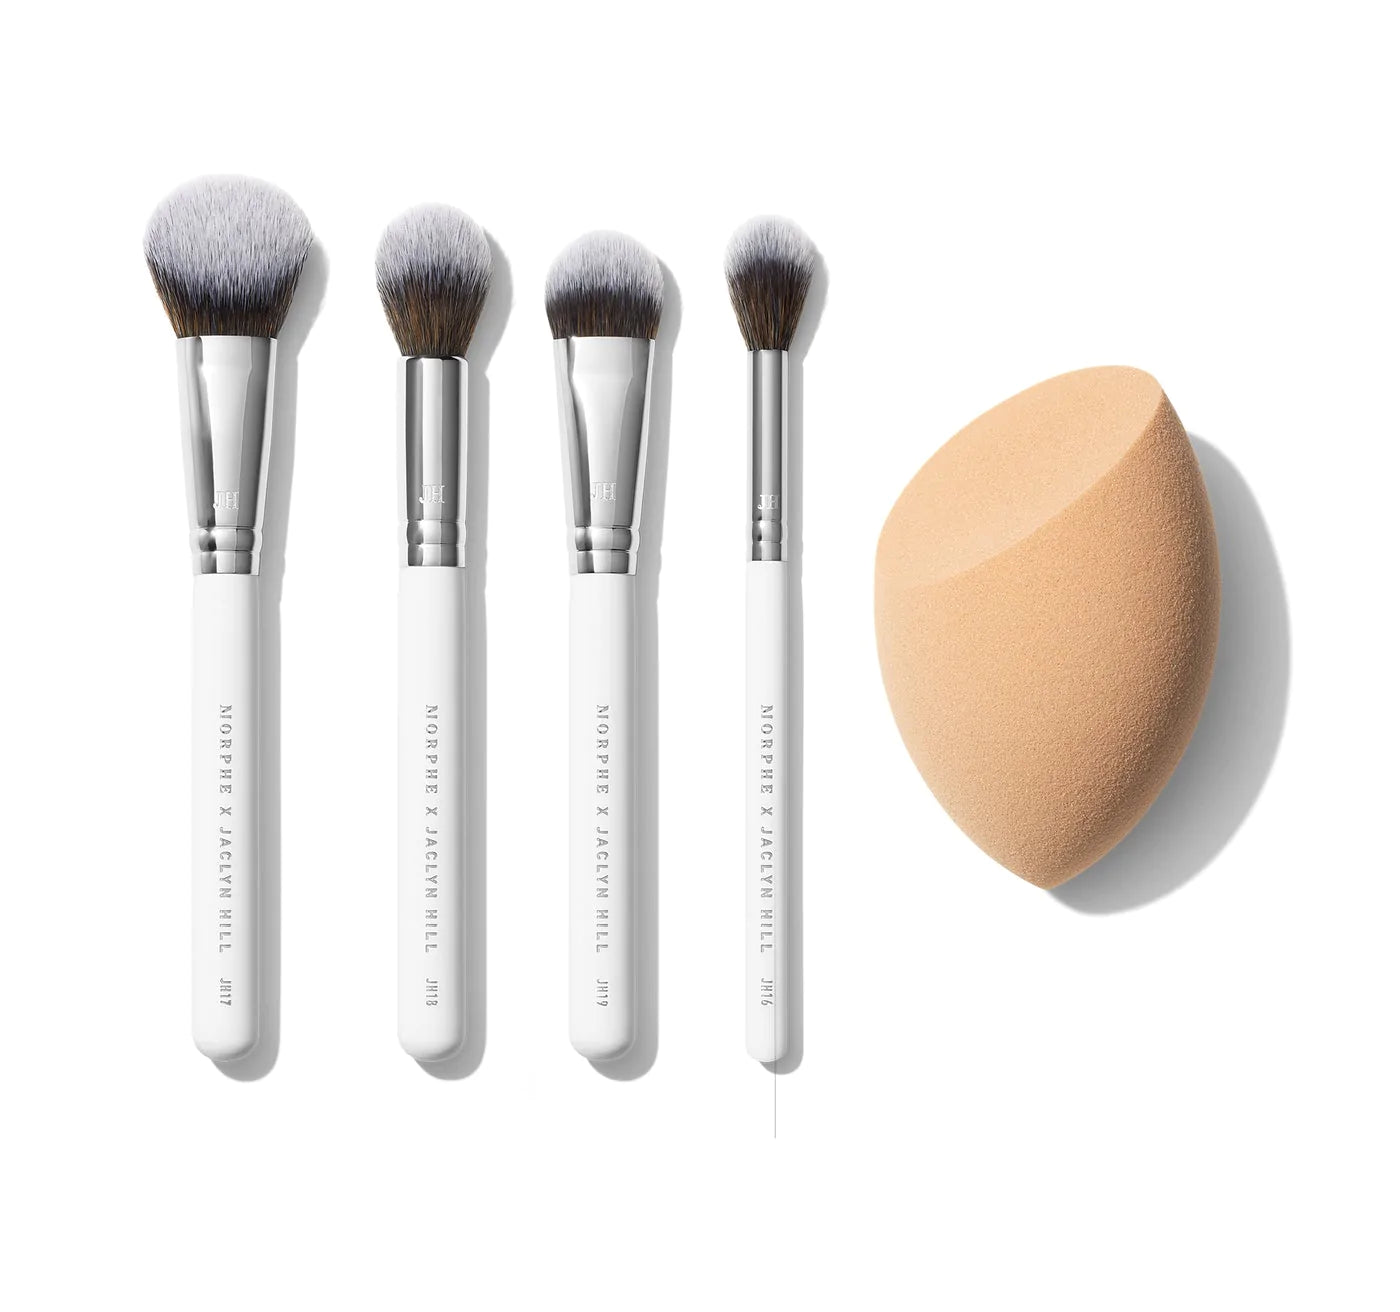 MORPHE X JACLYN HILL THE MASTER BRIGHTENING BRUSH COLLECTION- comes with a silver pouch